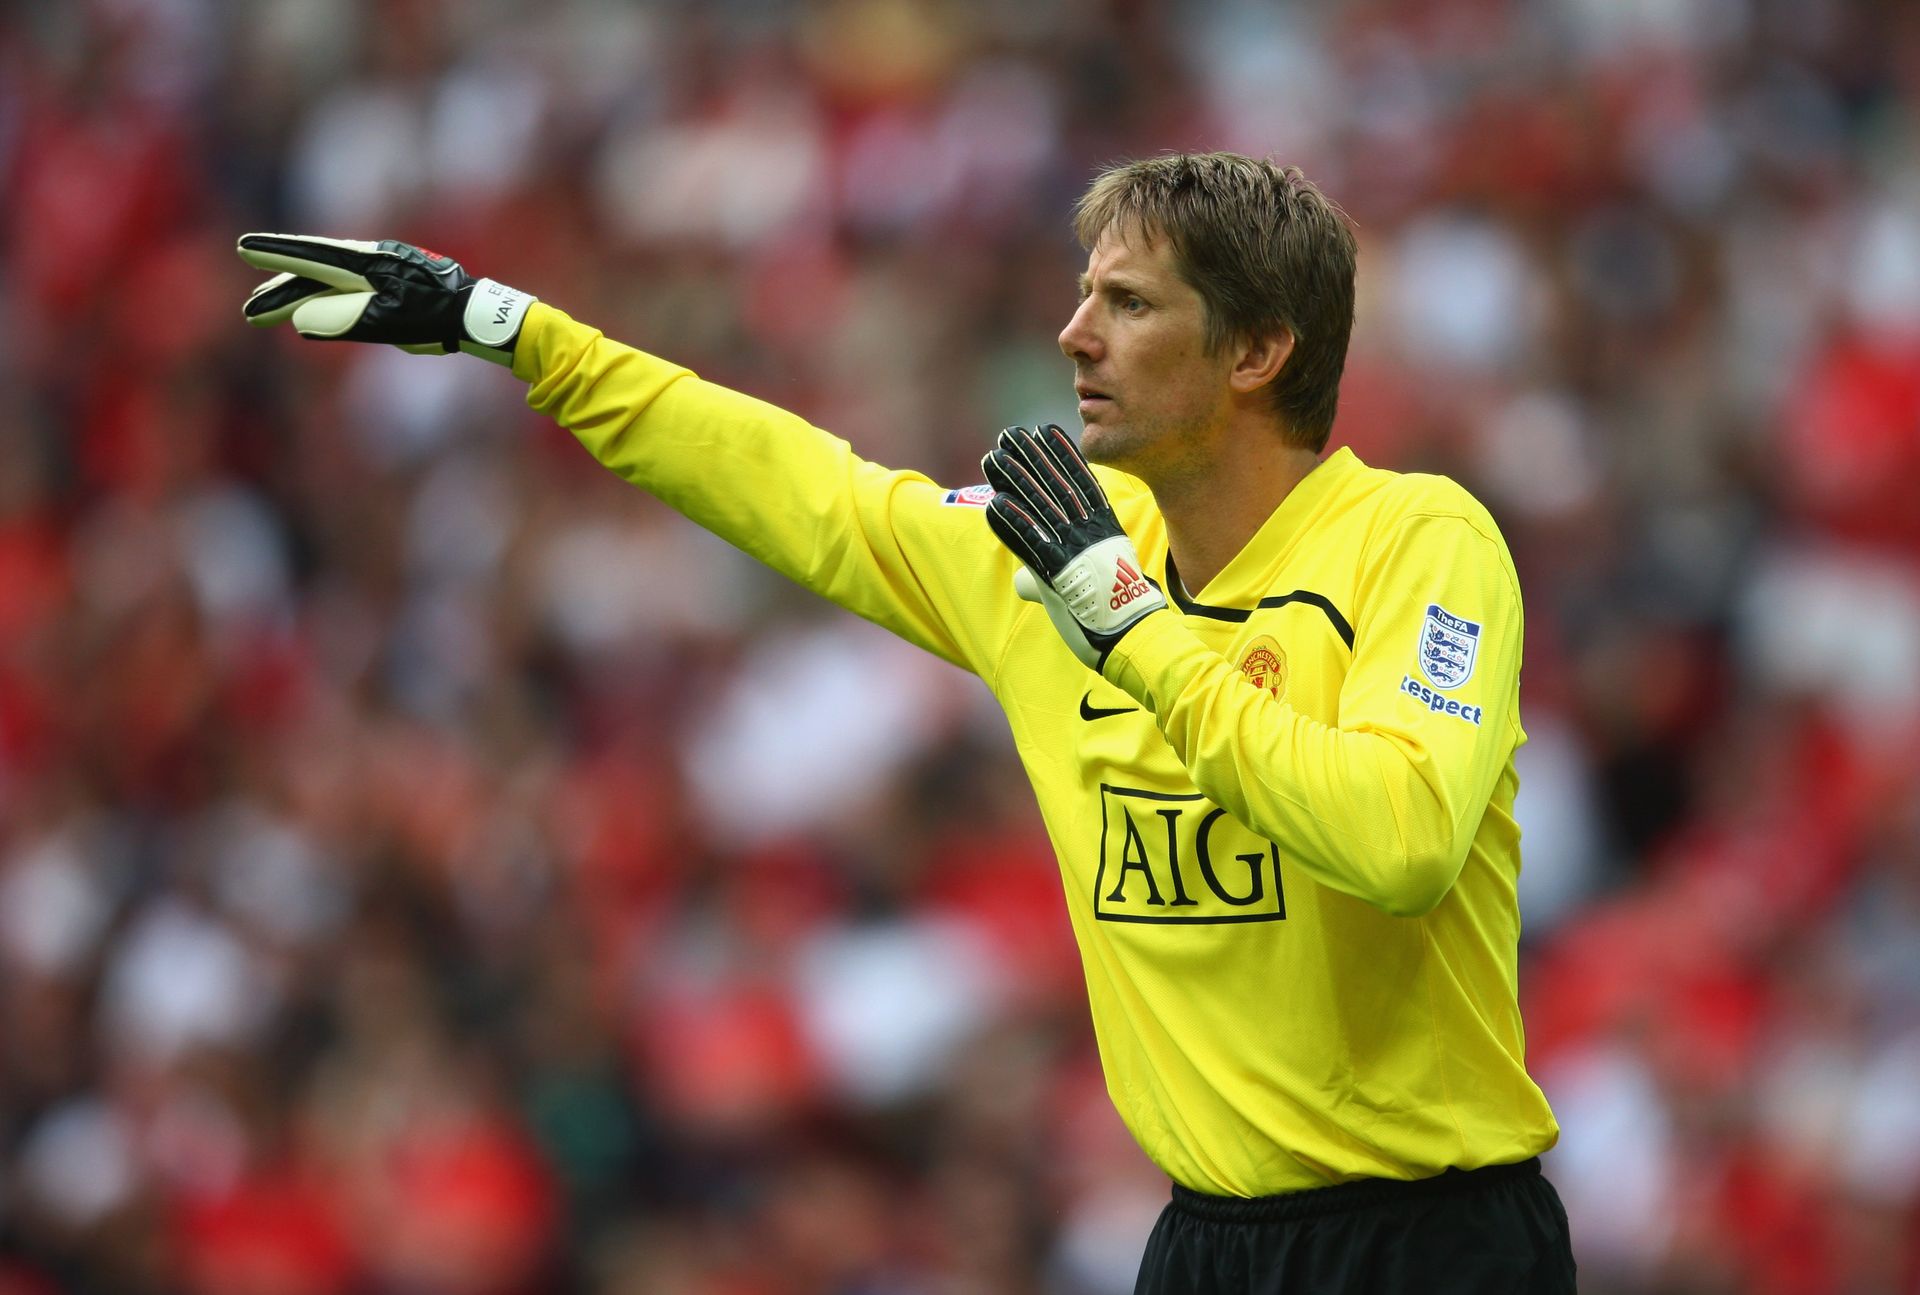 <p>                     One of the most consistent goalkeepers of the 2000s, Edwin van der Sar won 130 caps for the Netherlands between 1995 and 2008.                   </p>                                      <p>                     Named European goalkeeper of the year in 2009, Van der Sar won a series of trophies as a Manchester United player – including the Champions League in 2008 – and was one of the best of his generation.                   </p>